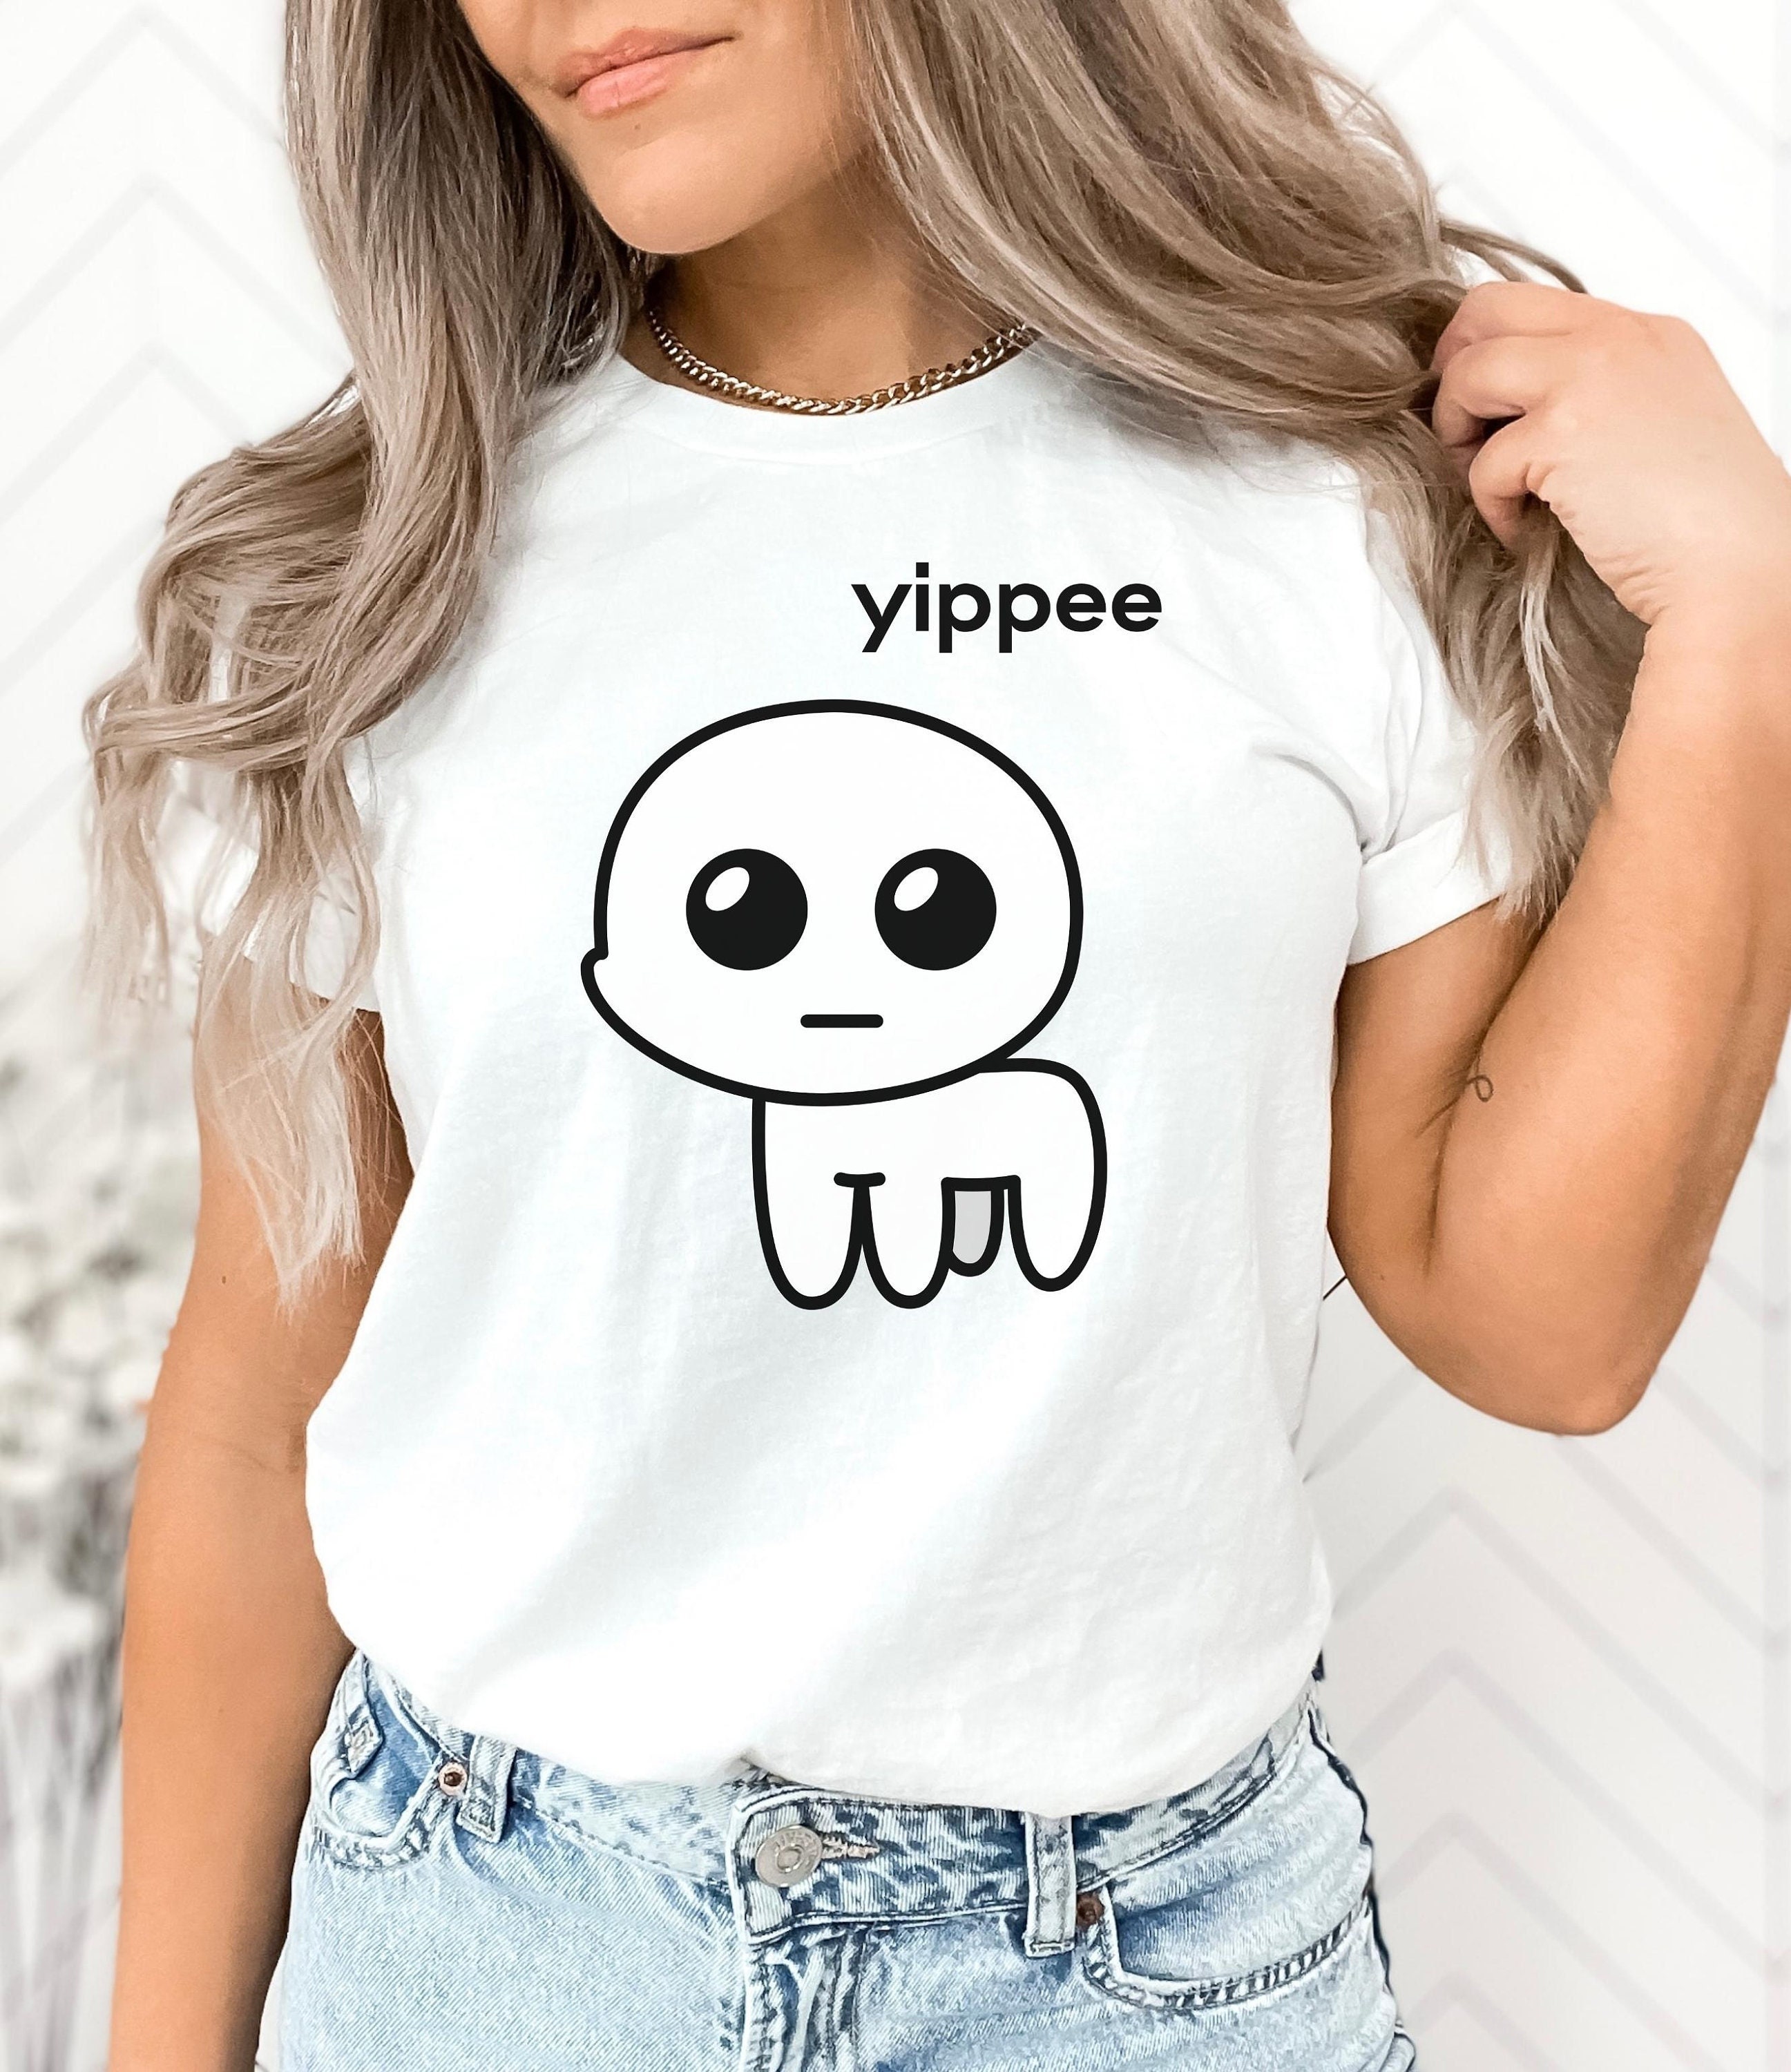  TBH Autism Creature Meme With Headphones T-Shirt